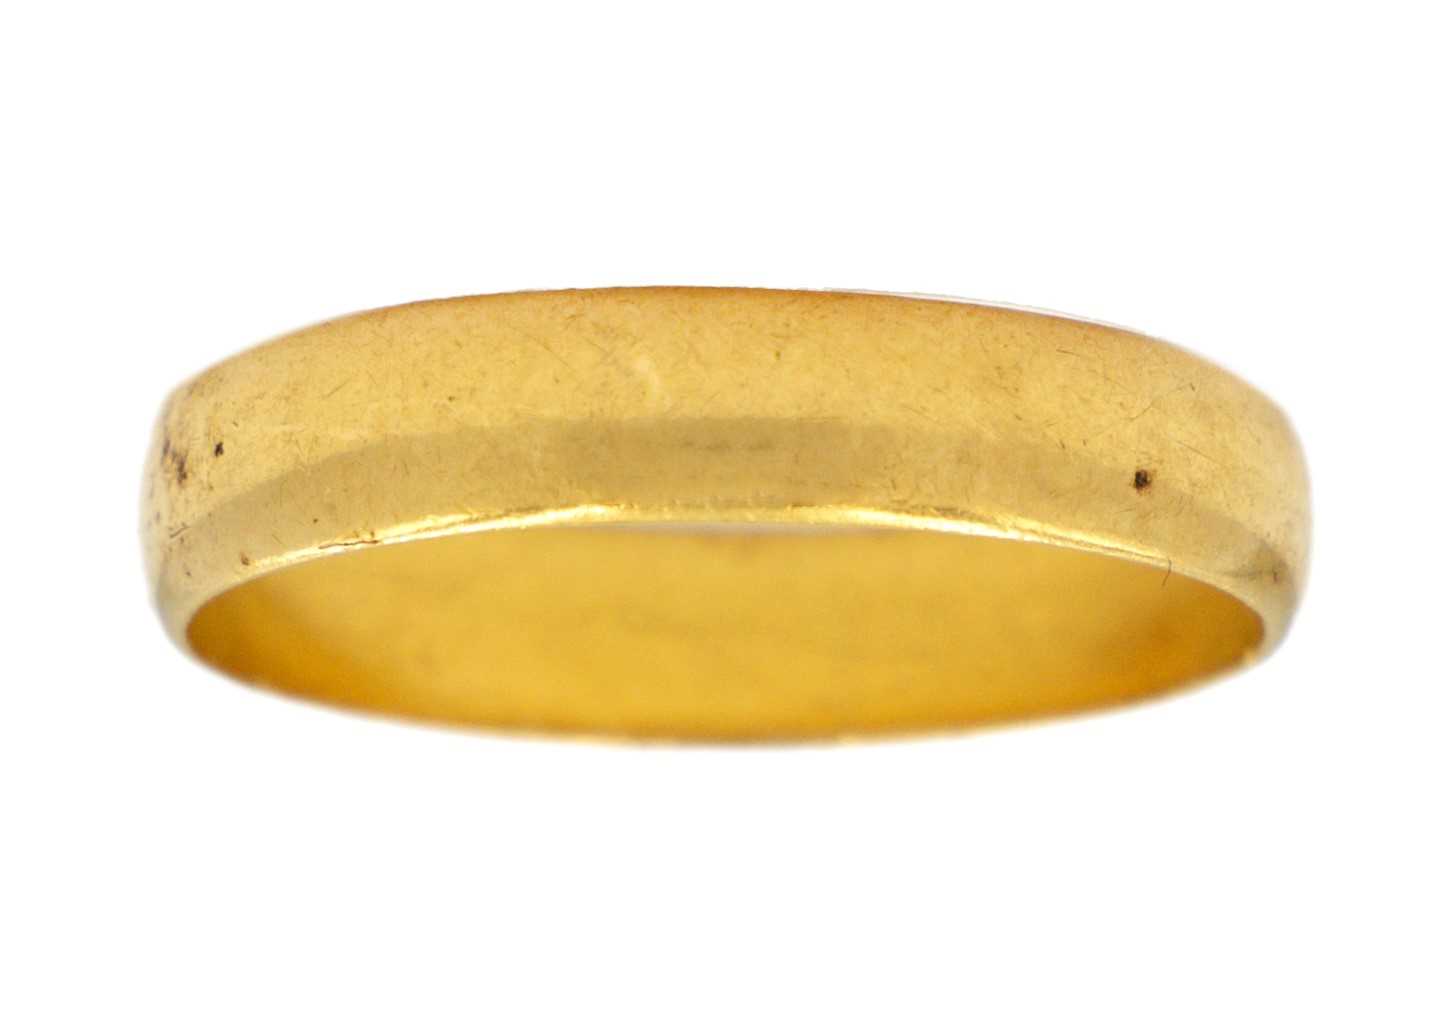 A 22ct band ring.